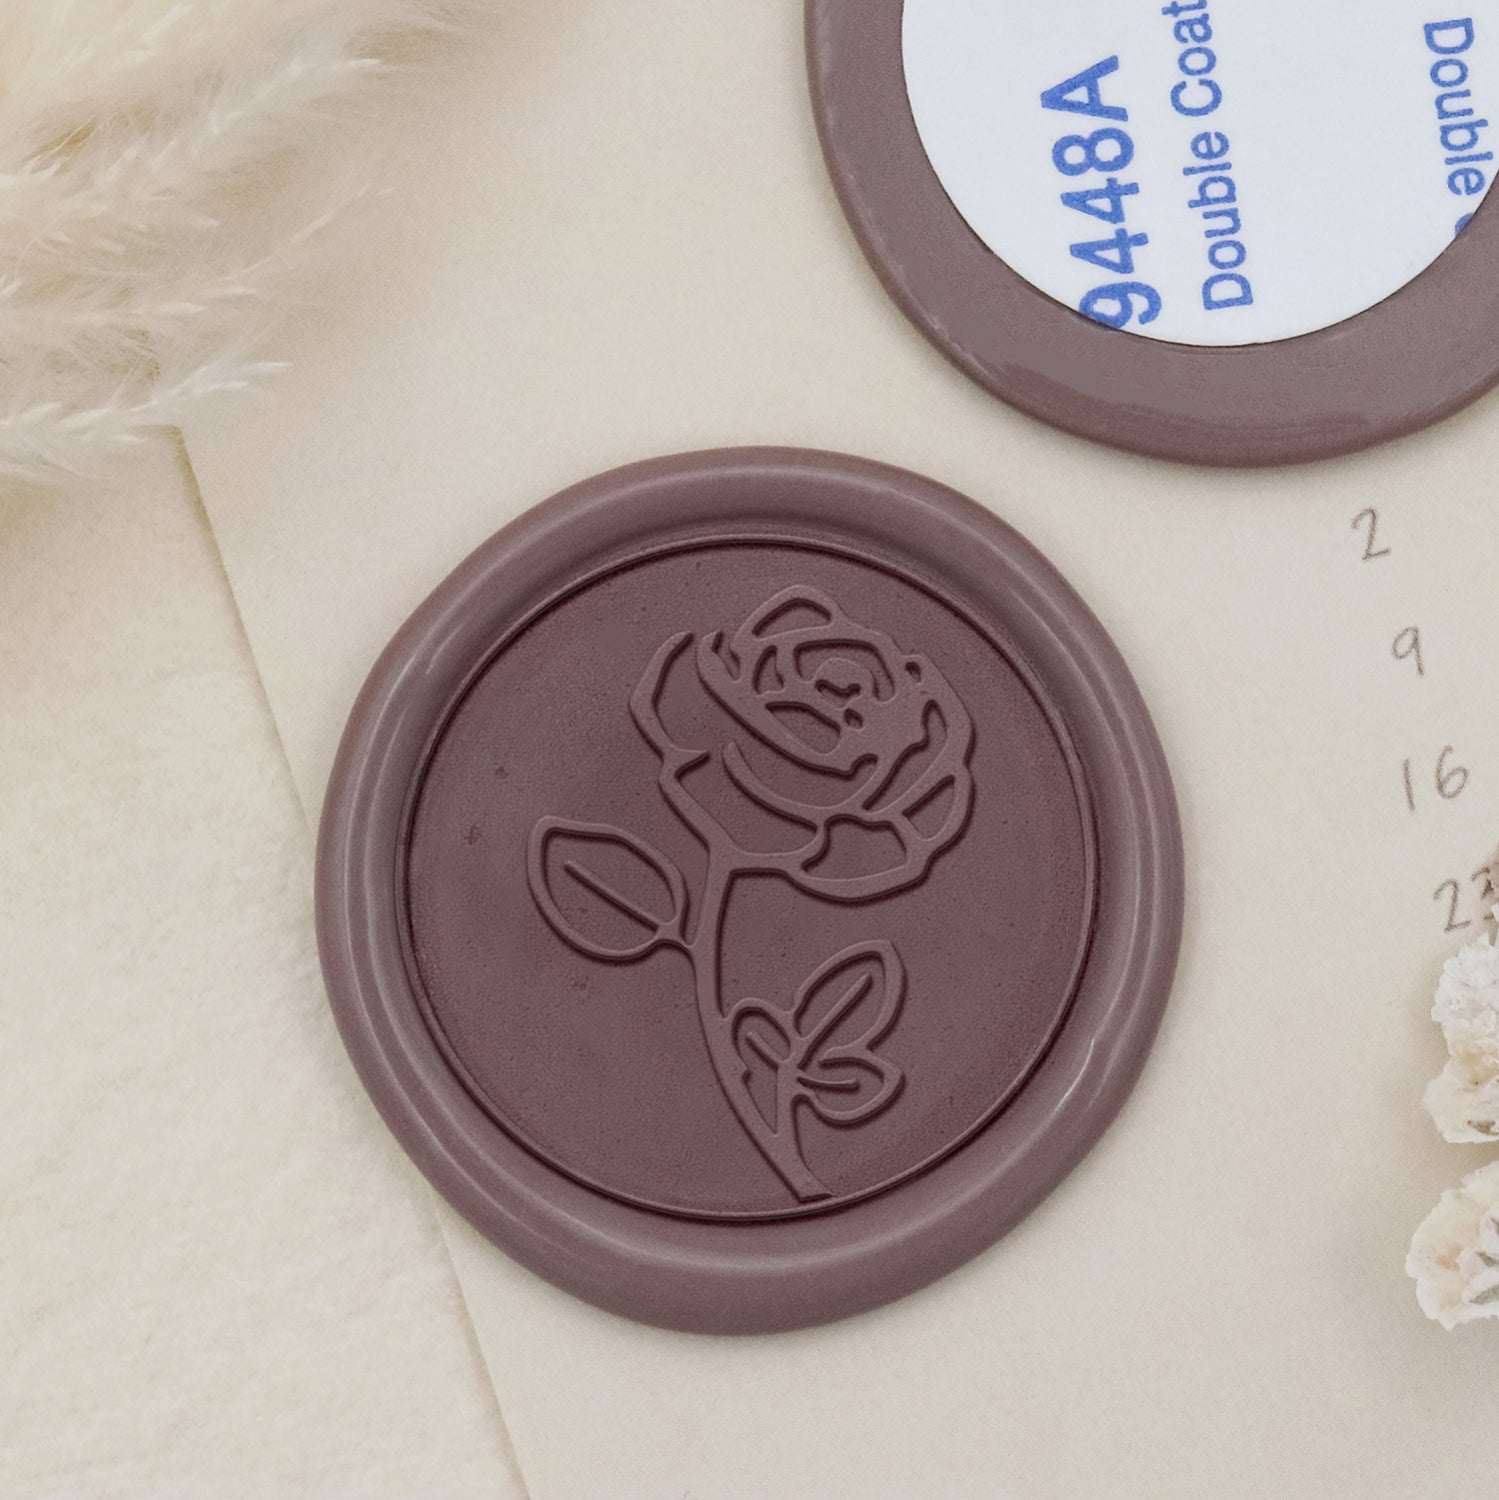 Stamprints Rose Self-adhesive Wax Seal Stickers - style 01